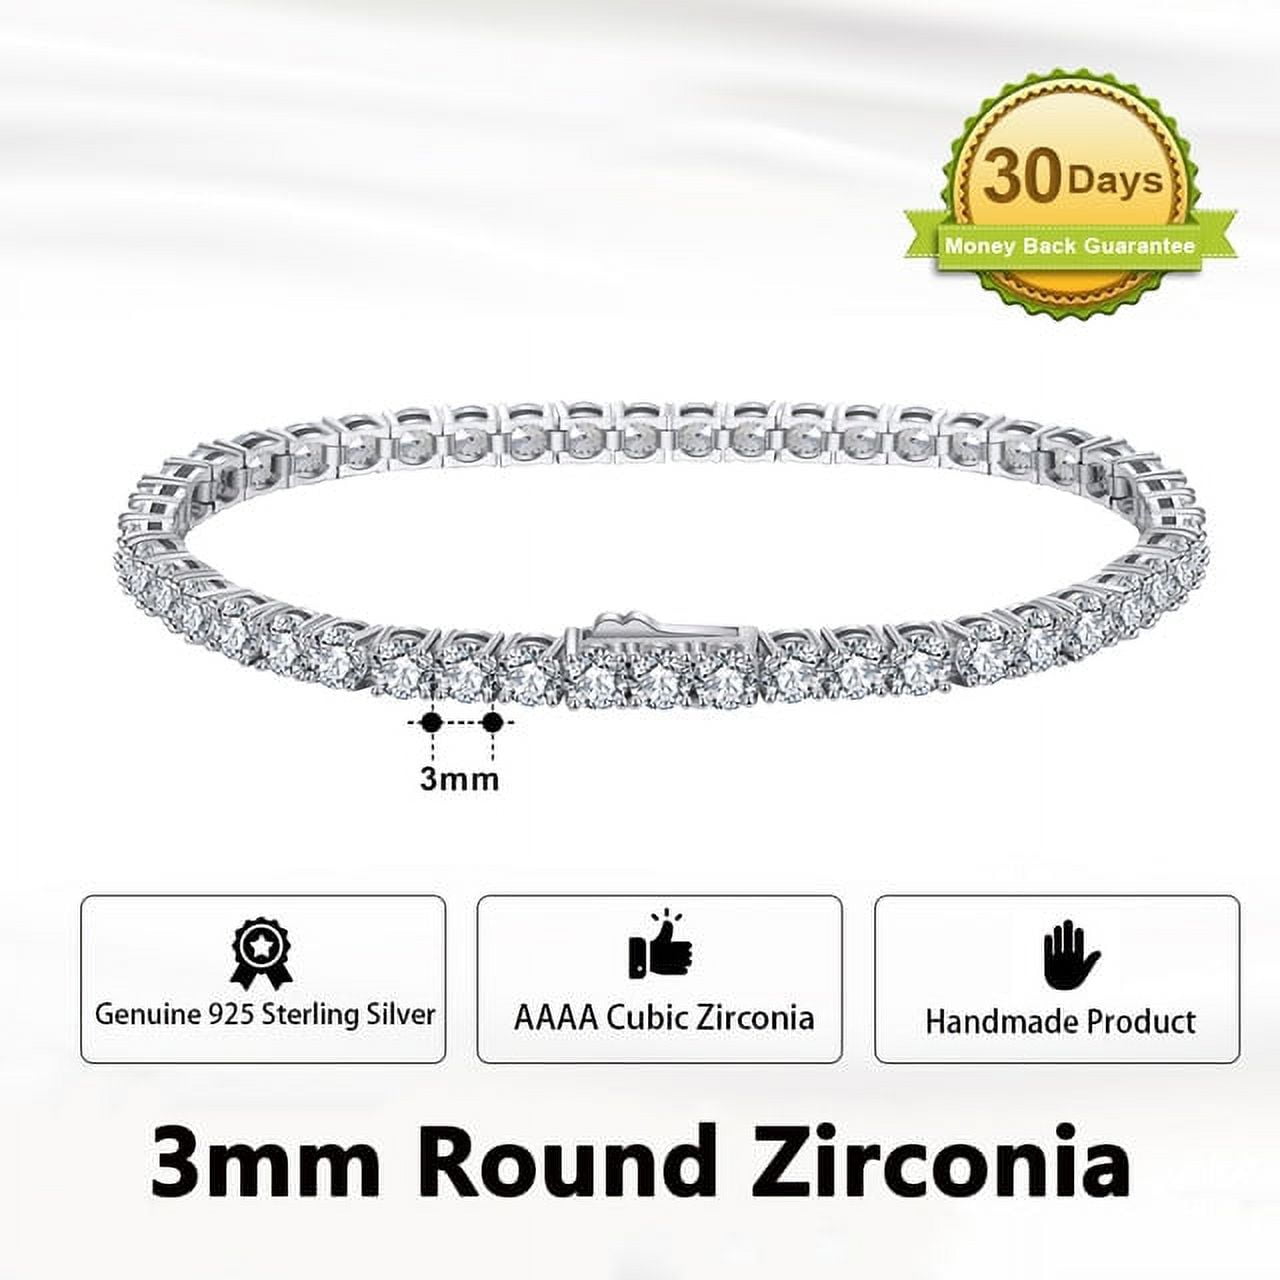 JEWELS Authentic 925 Sterling Silver Tennis Bracelet Clear Cubic Zirconia Silver Bangle Party Jewelry Men Hand Chain SB61 c3129590 3d51 4fe5 a0e2 72dff430d7b6.91746ae0619edb683de818cbfc4e2536